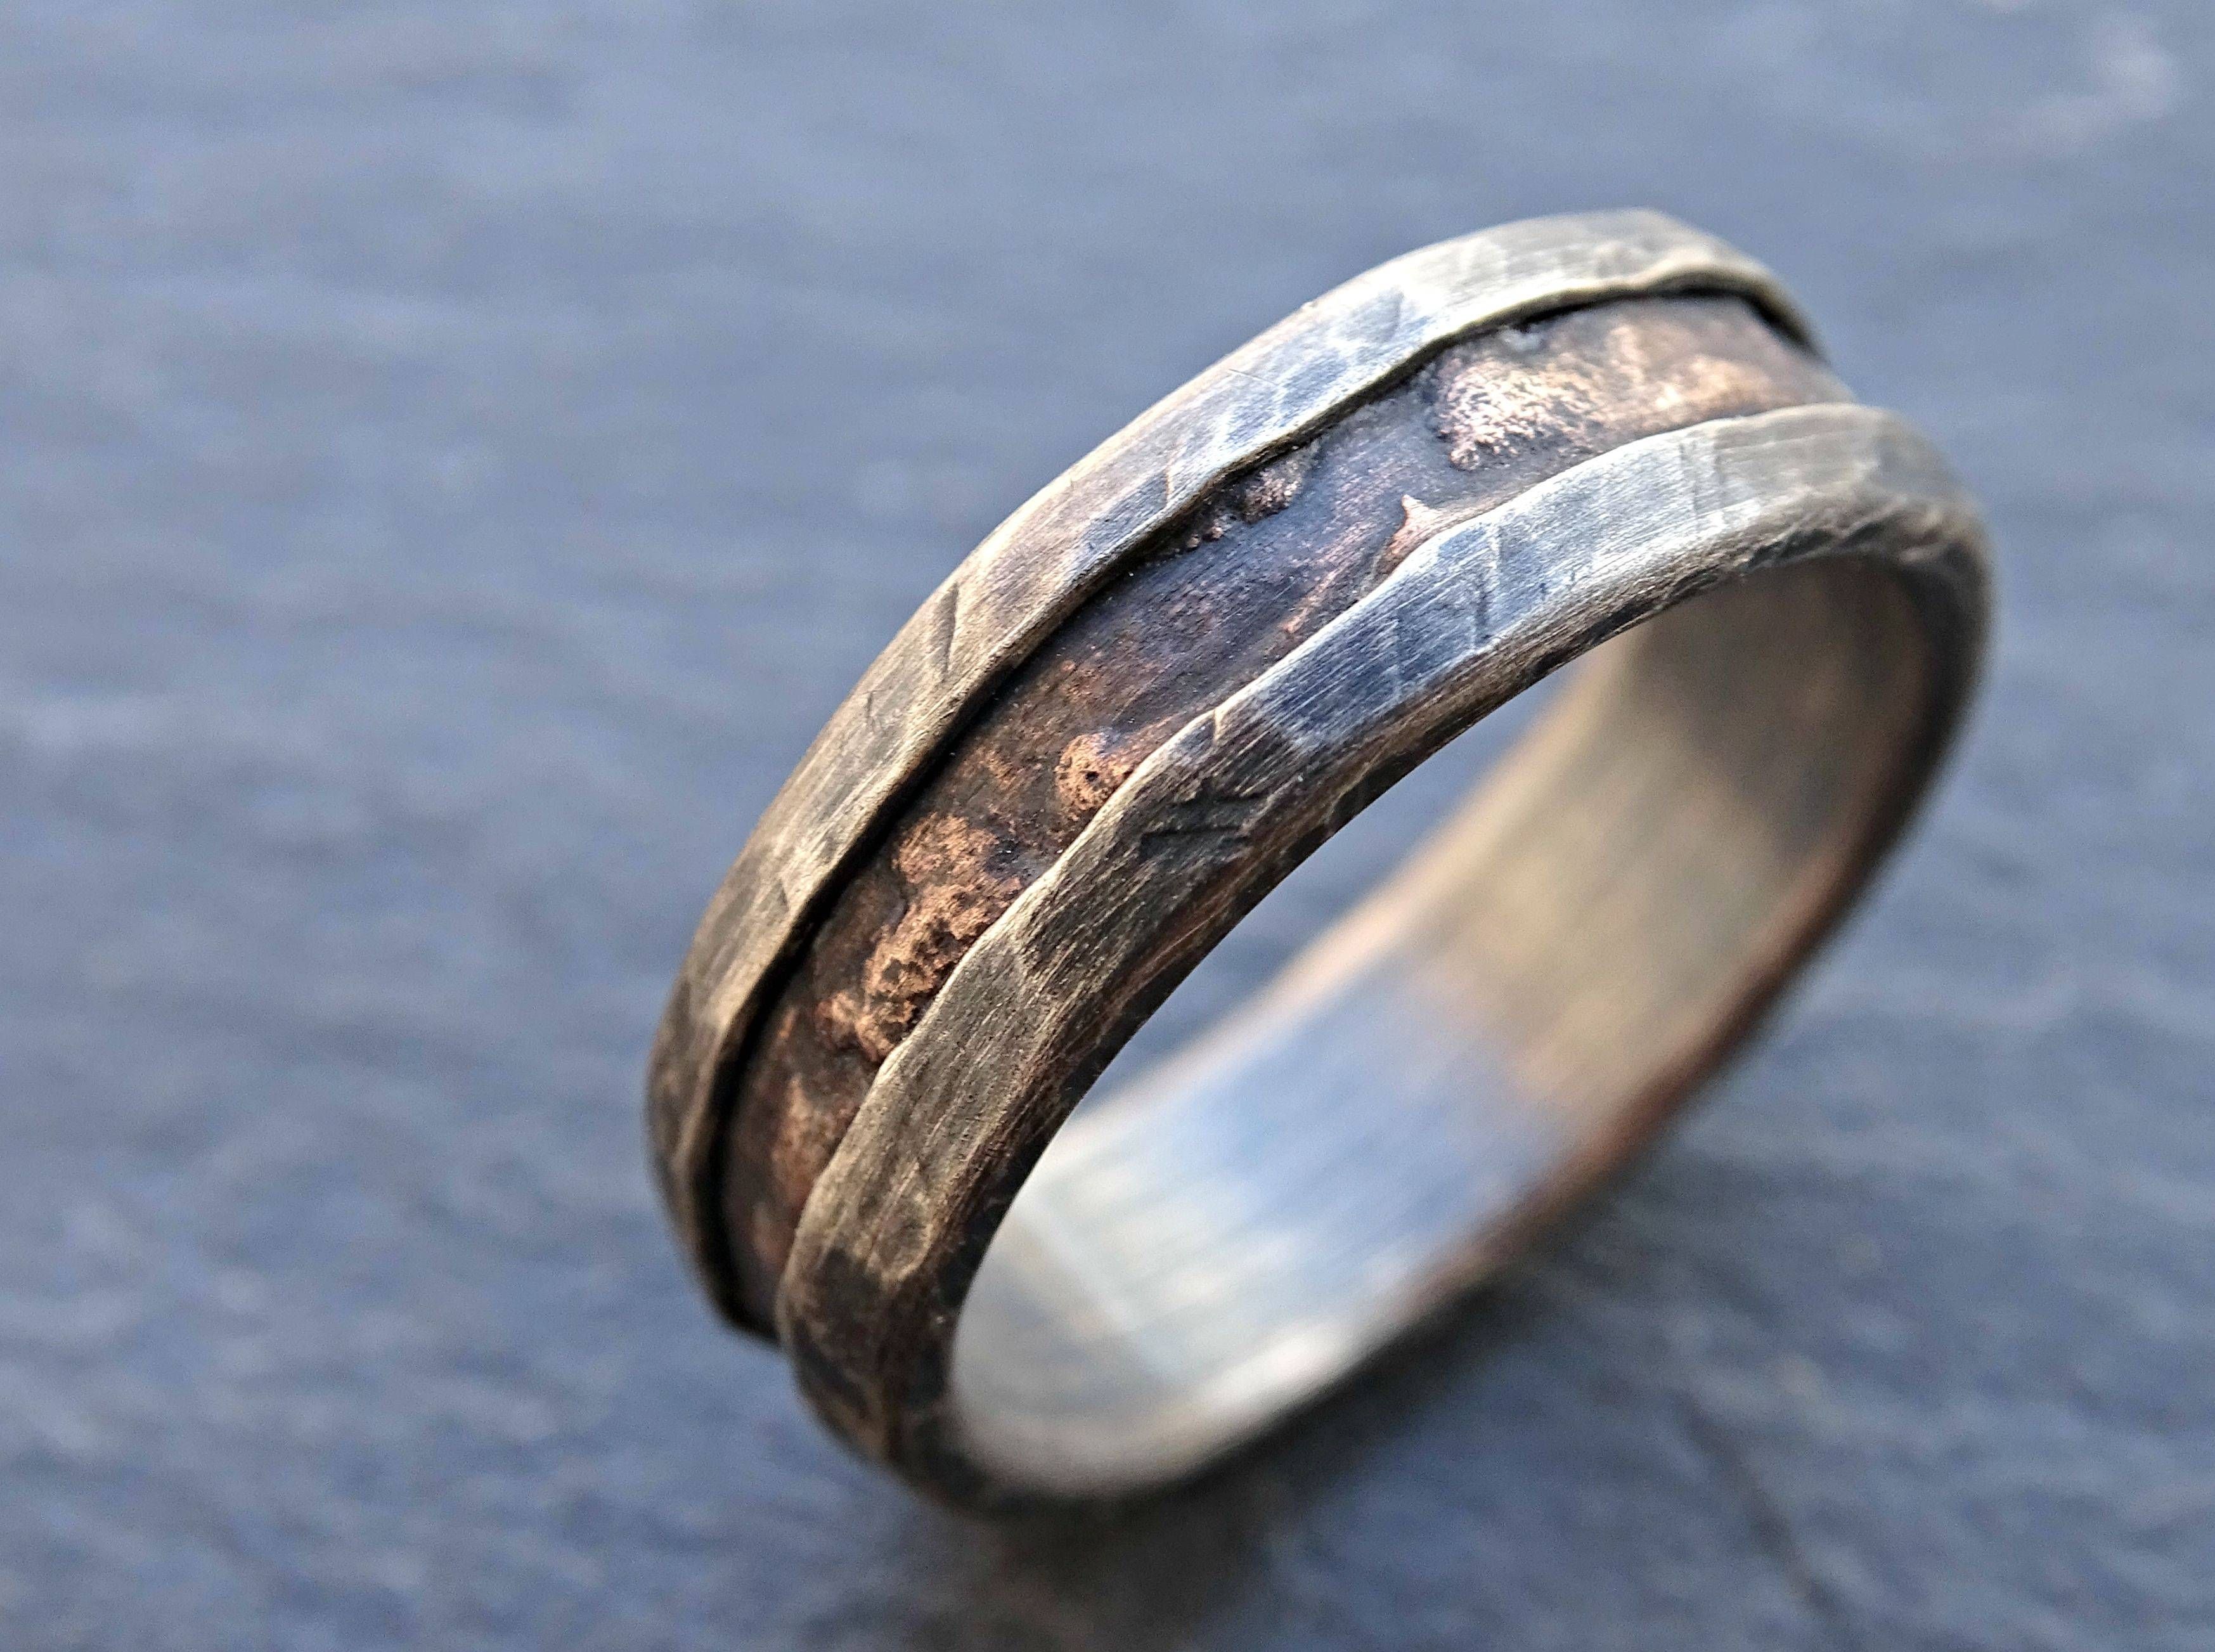 Buy A Hand Made Cool Mens Ring, Alternative Wedding Band Rugged For Men's Wood Grain Wedding Bands (View 2 of 15)